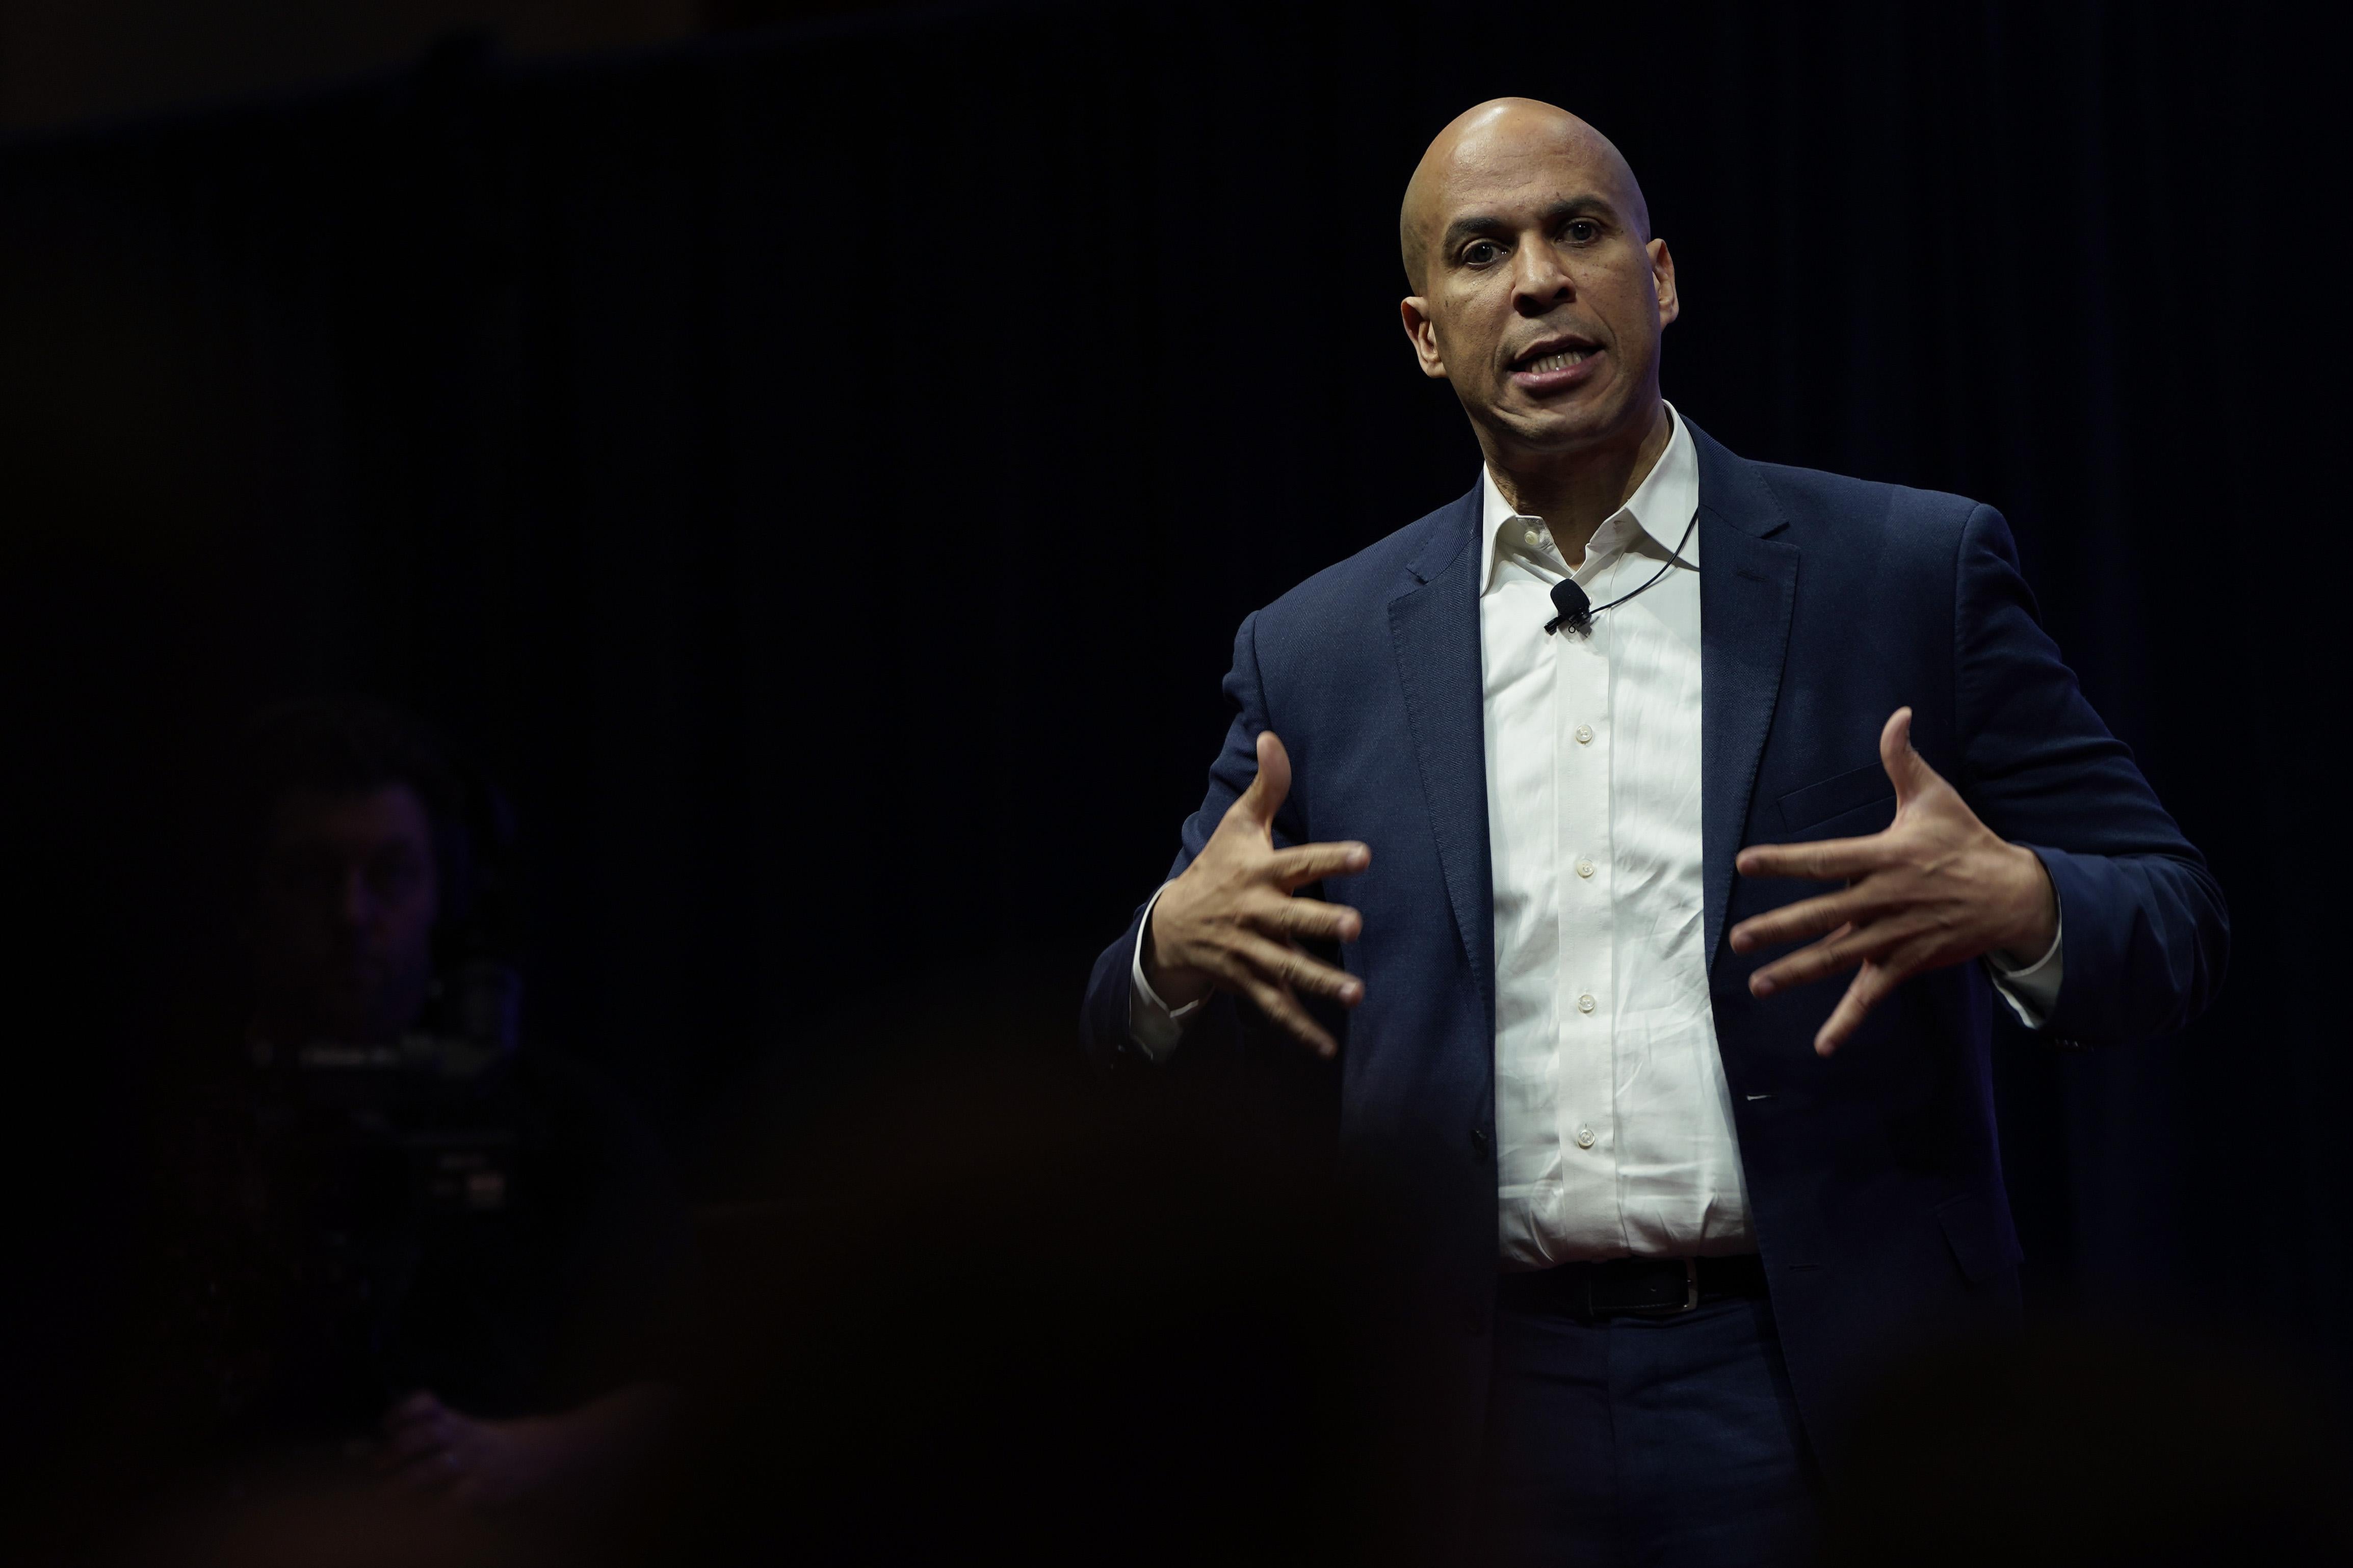 Cory Booker stretches out his fingers while speaking on a stage.